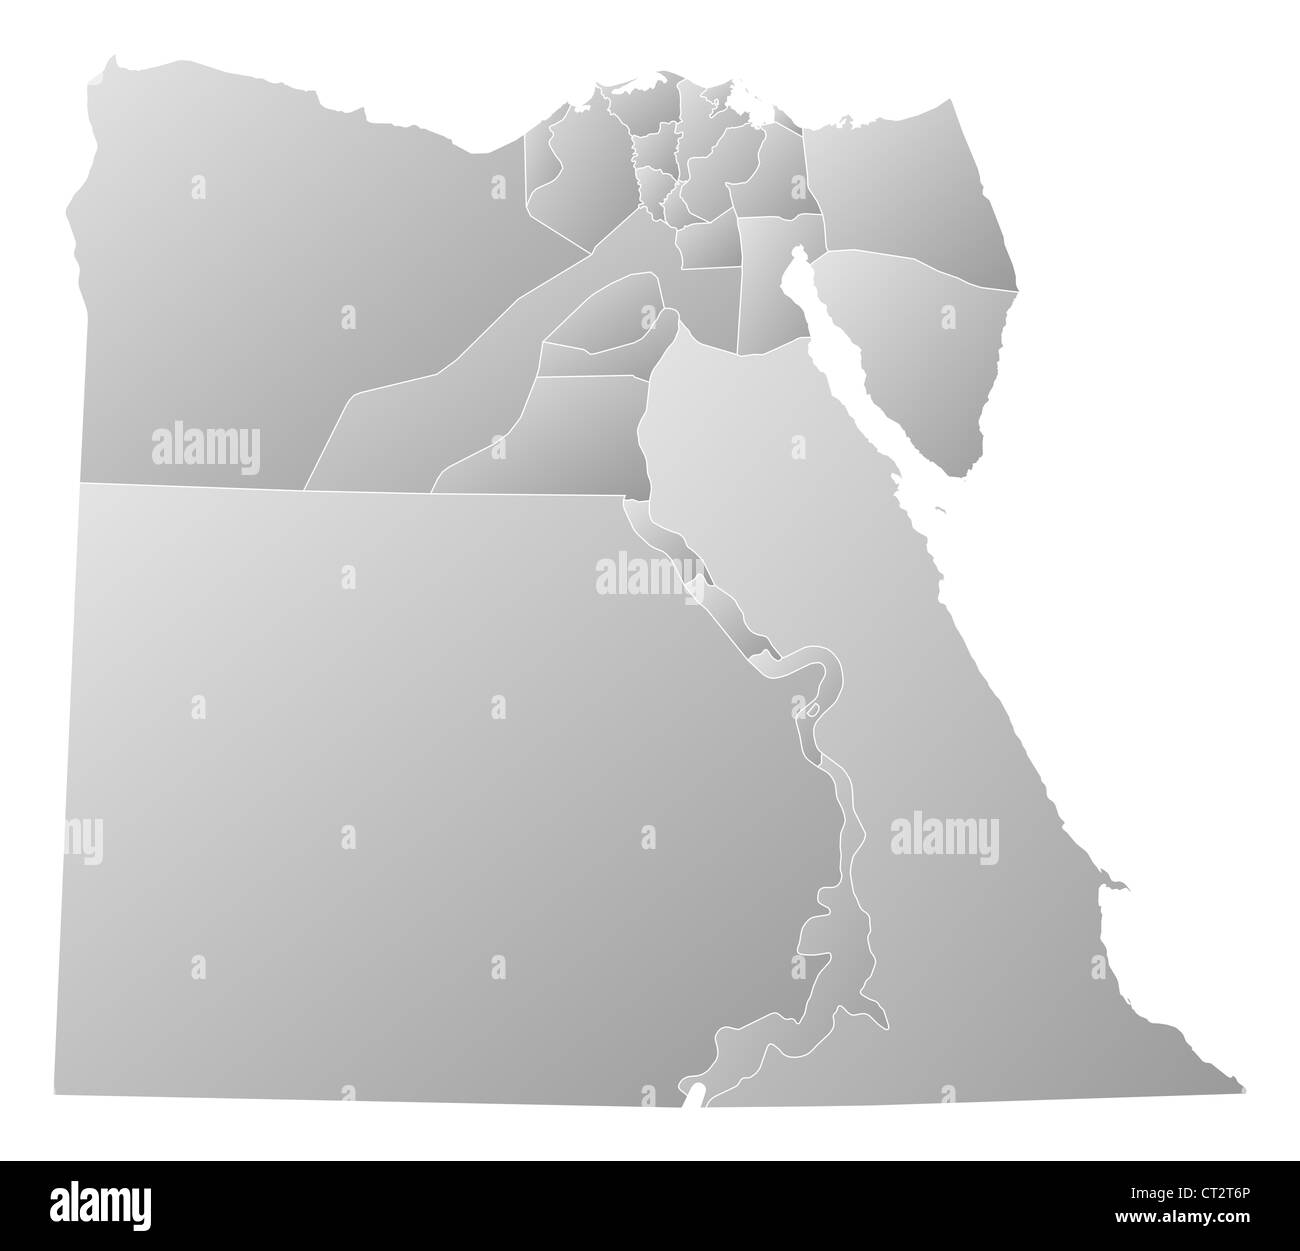 Political map of Egypt with the several governorates. Stock Photo